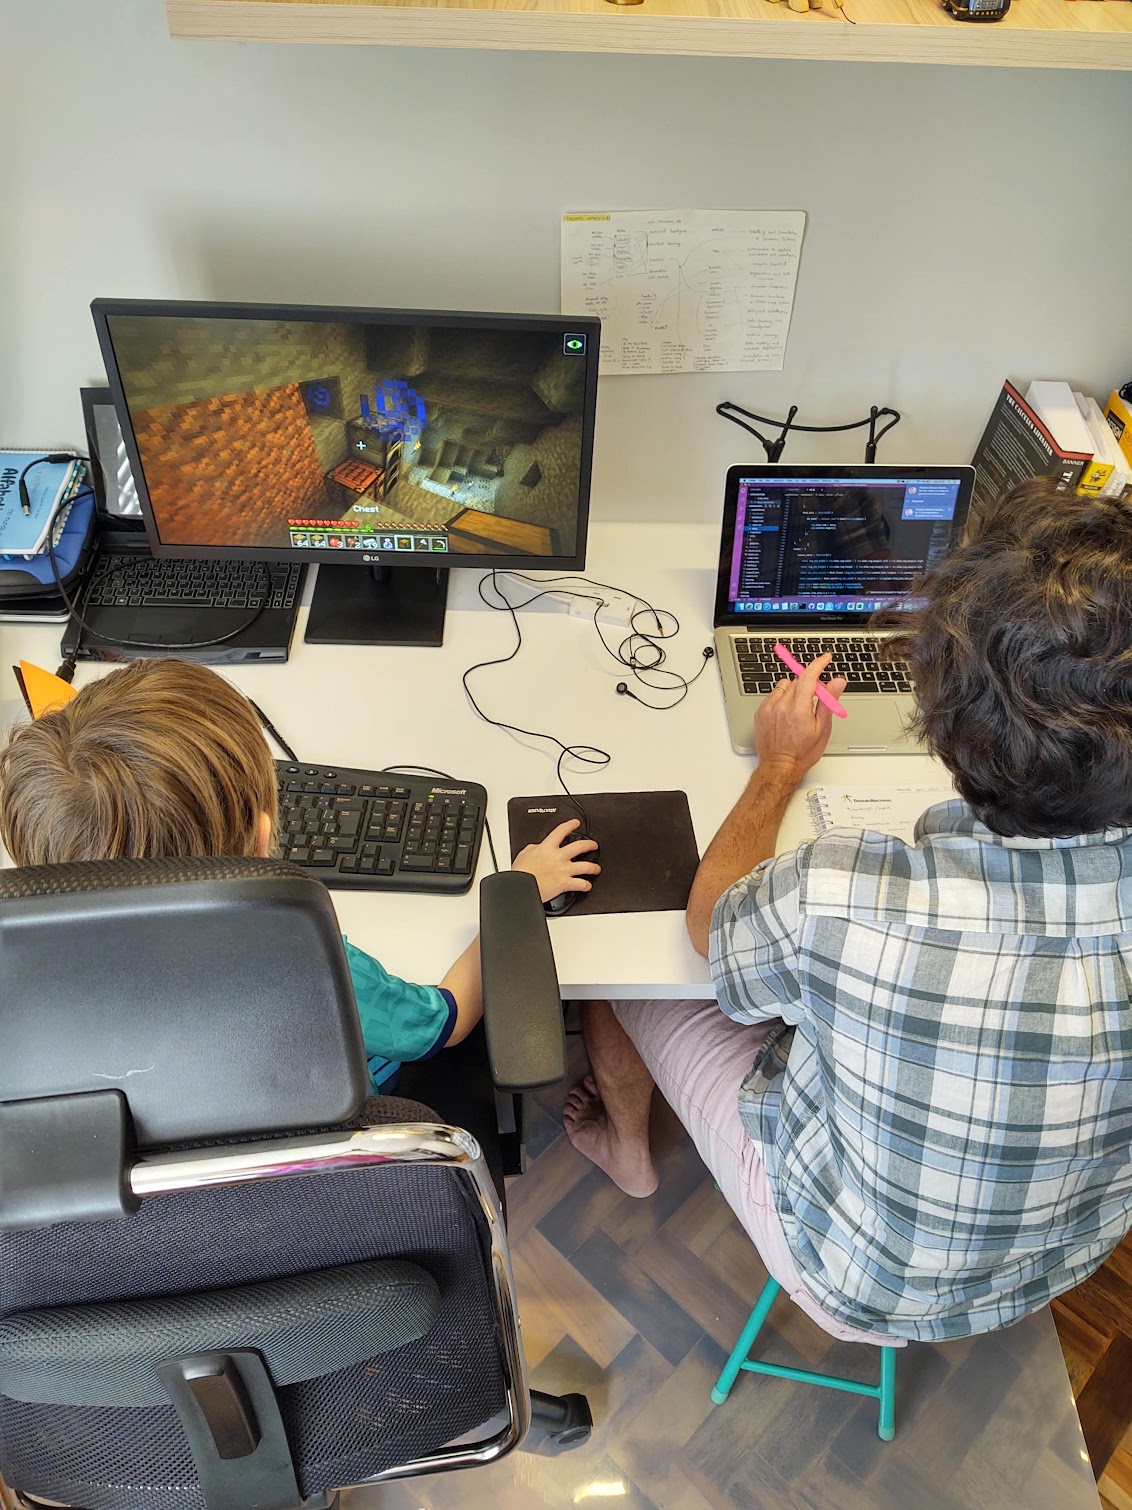 A picture from behind, showing my son playing minecraft on a big display with a nice chair, and I working on small stool on a small screen laptop.